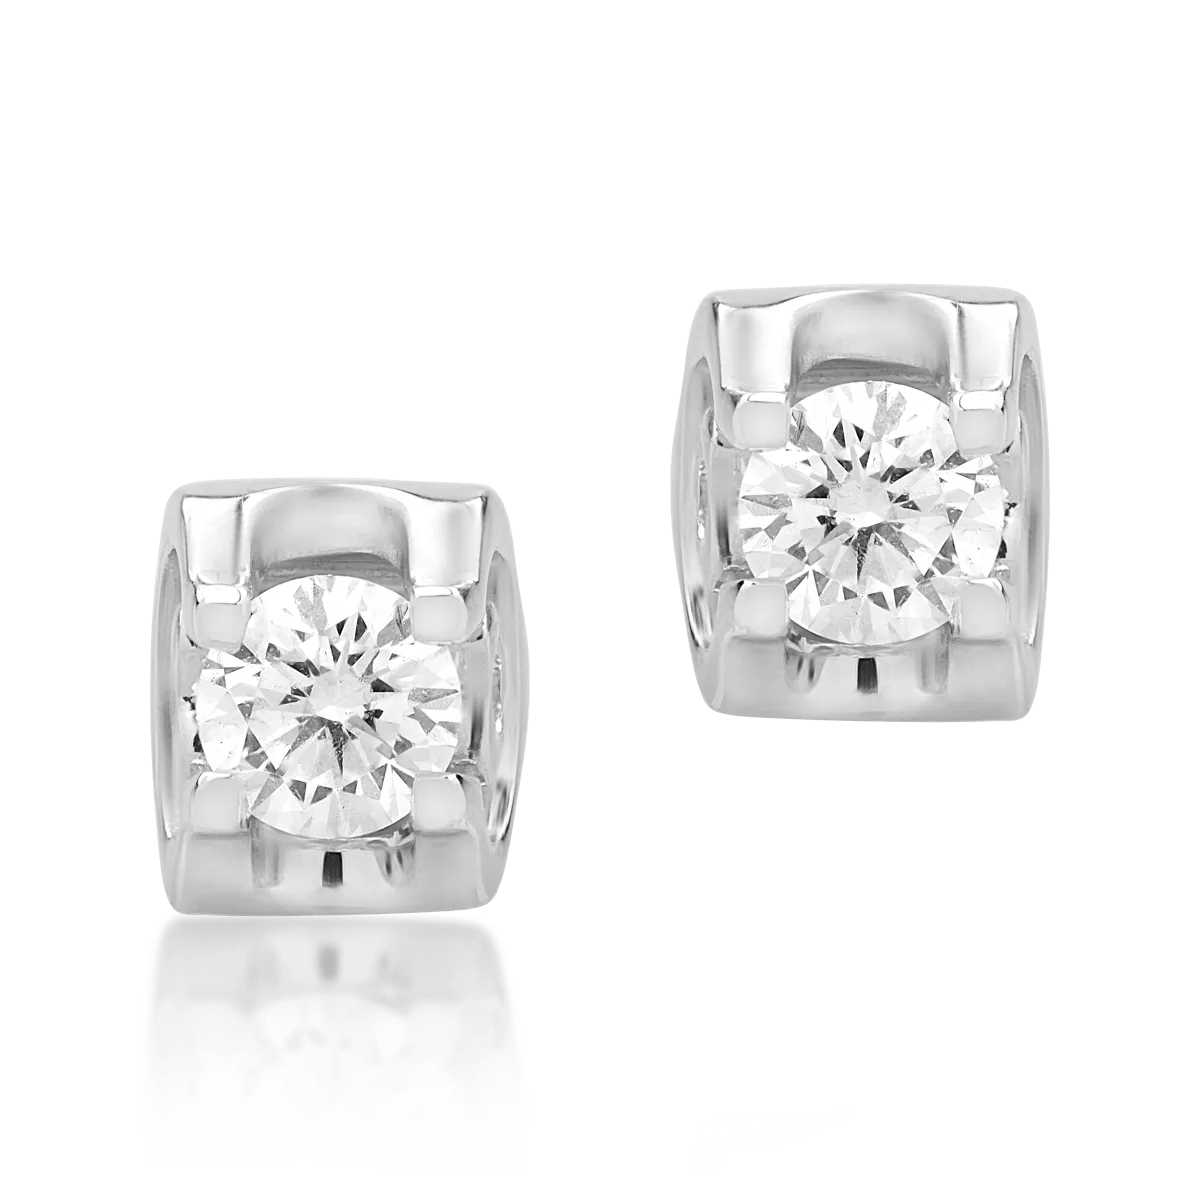 18K white gold earrings with 0.322ct diamonds